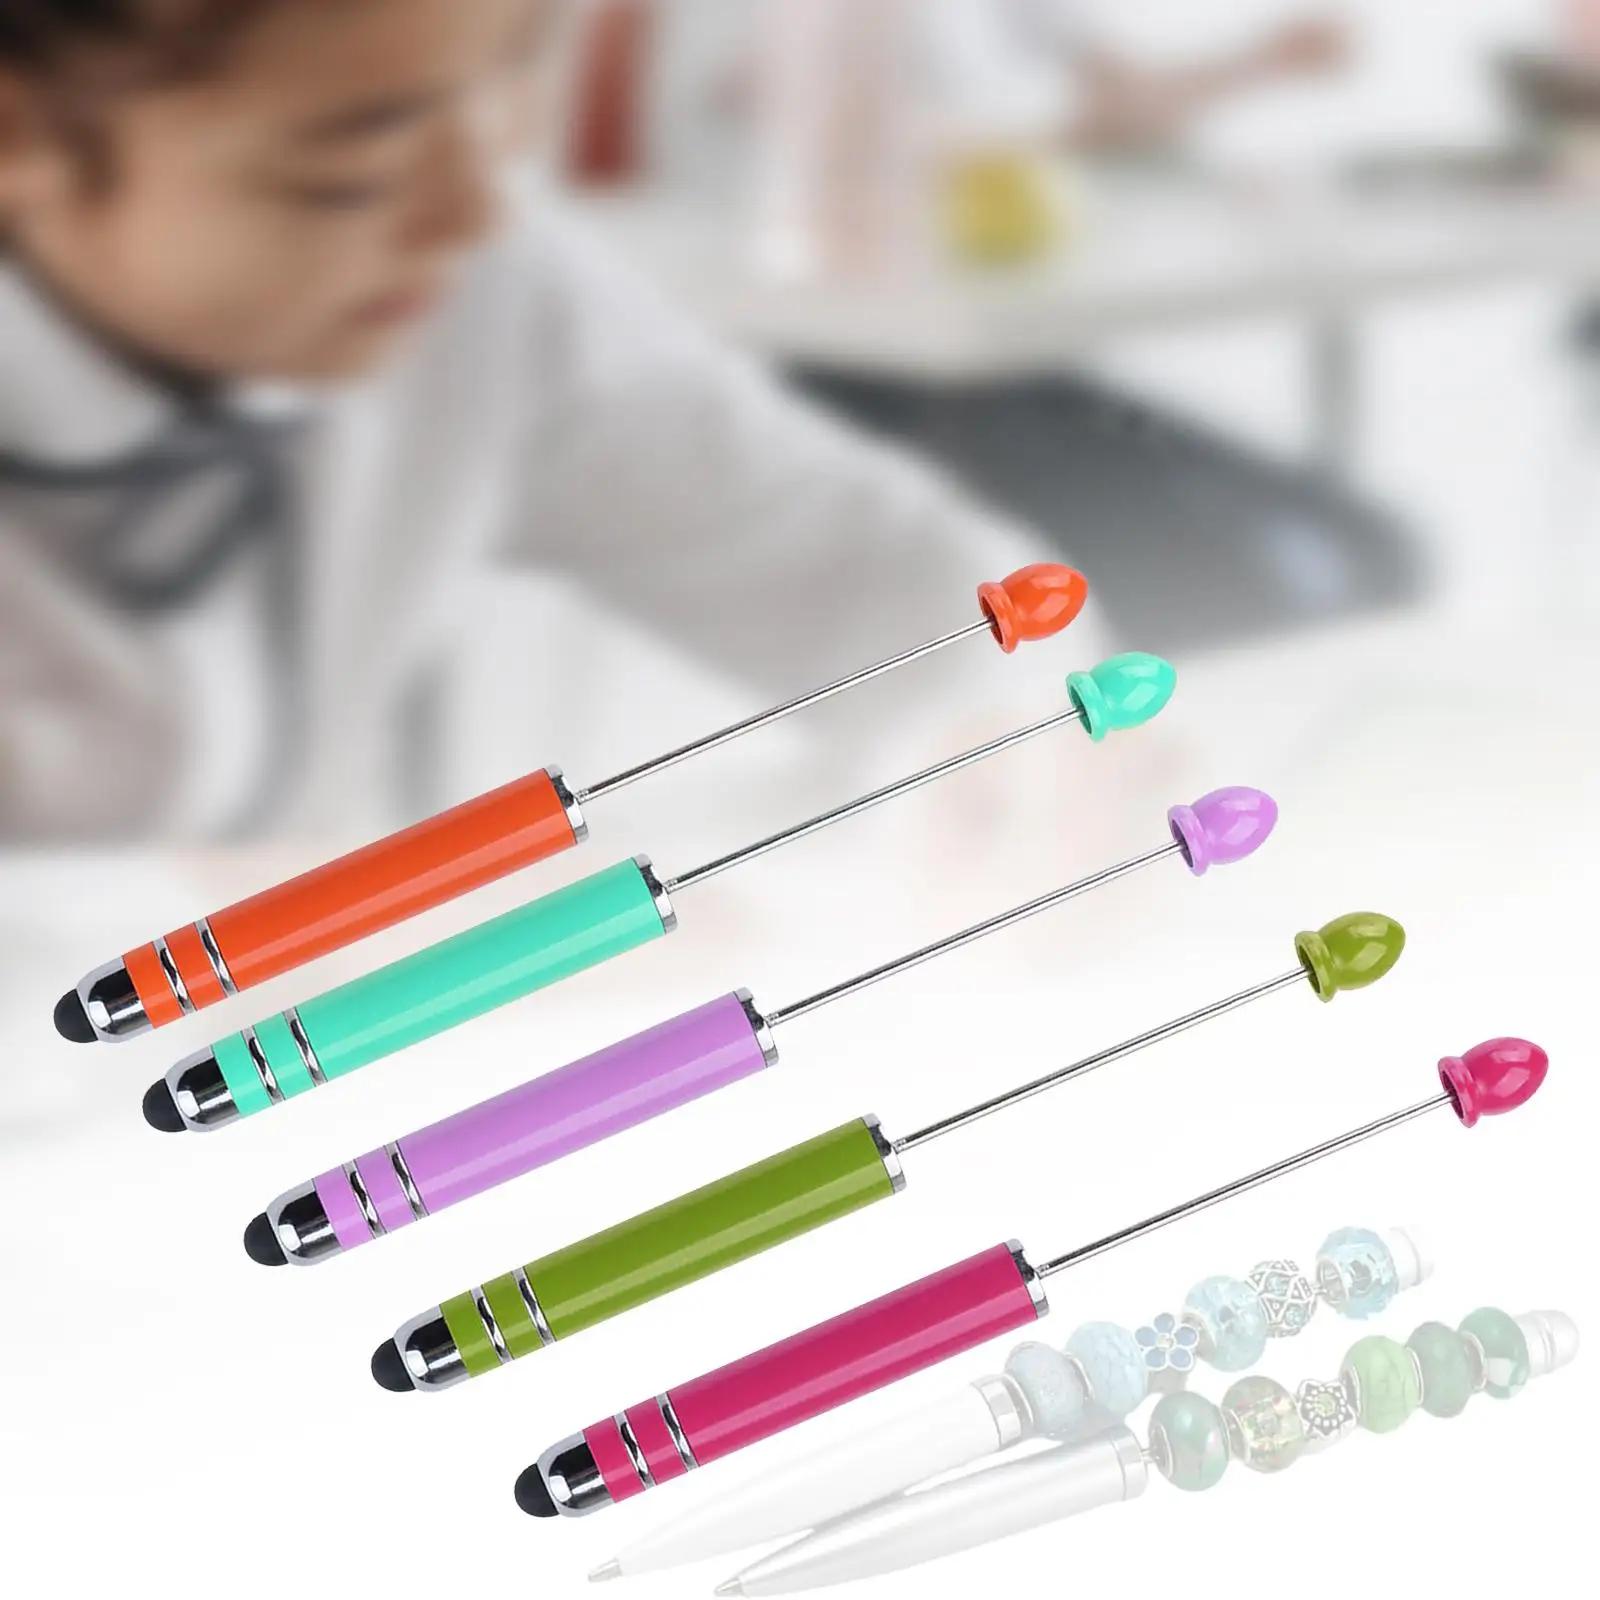 5x Creative Beadable Pens Art Drawing DIY Bead Ballpoint Pen Rollerball Pen for Exam Spare Classroom Taking Notes Drawing School